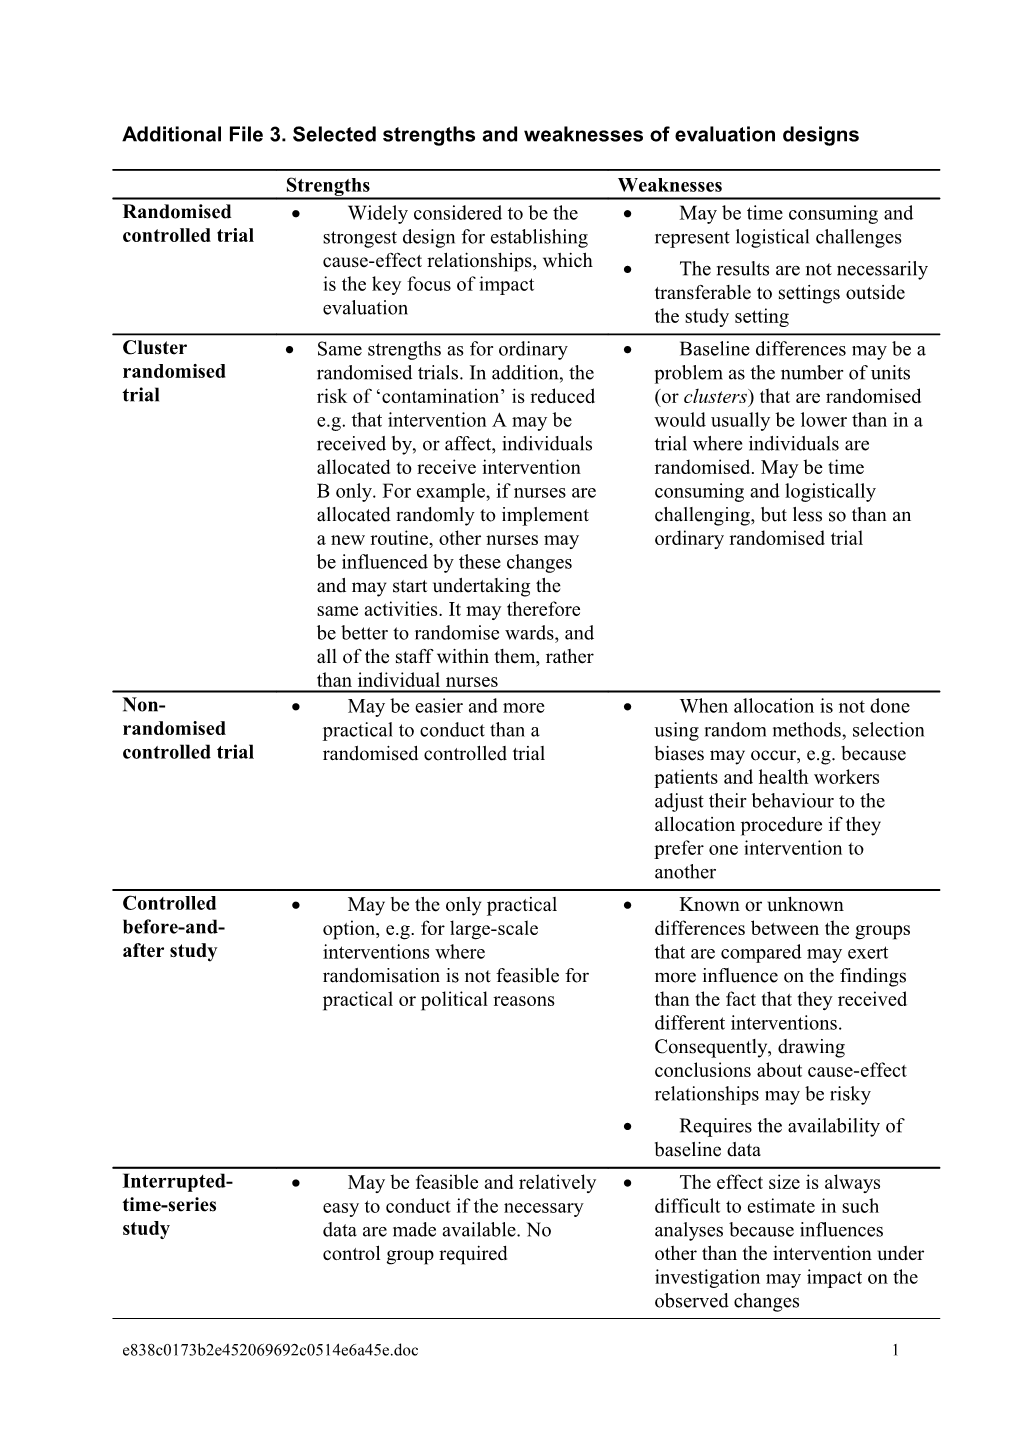 Additional File 3. Selected Strengths and Weaknesses of Evaluation Designs